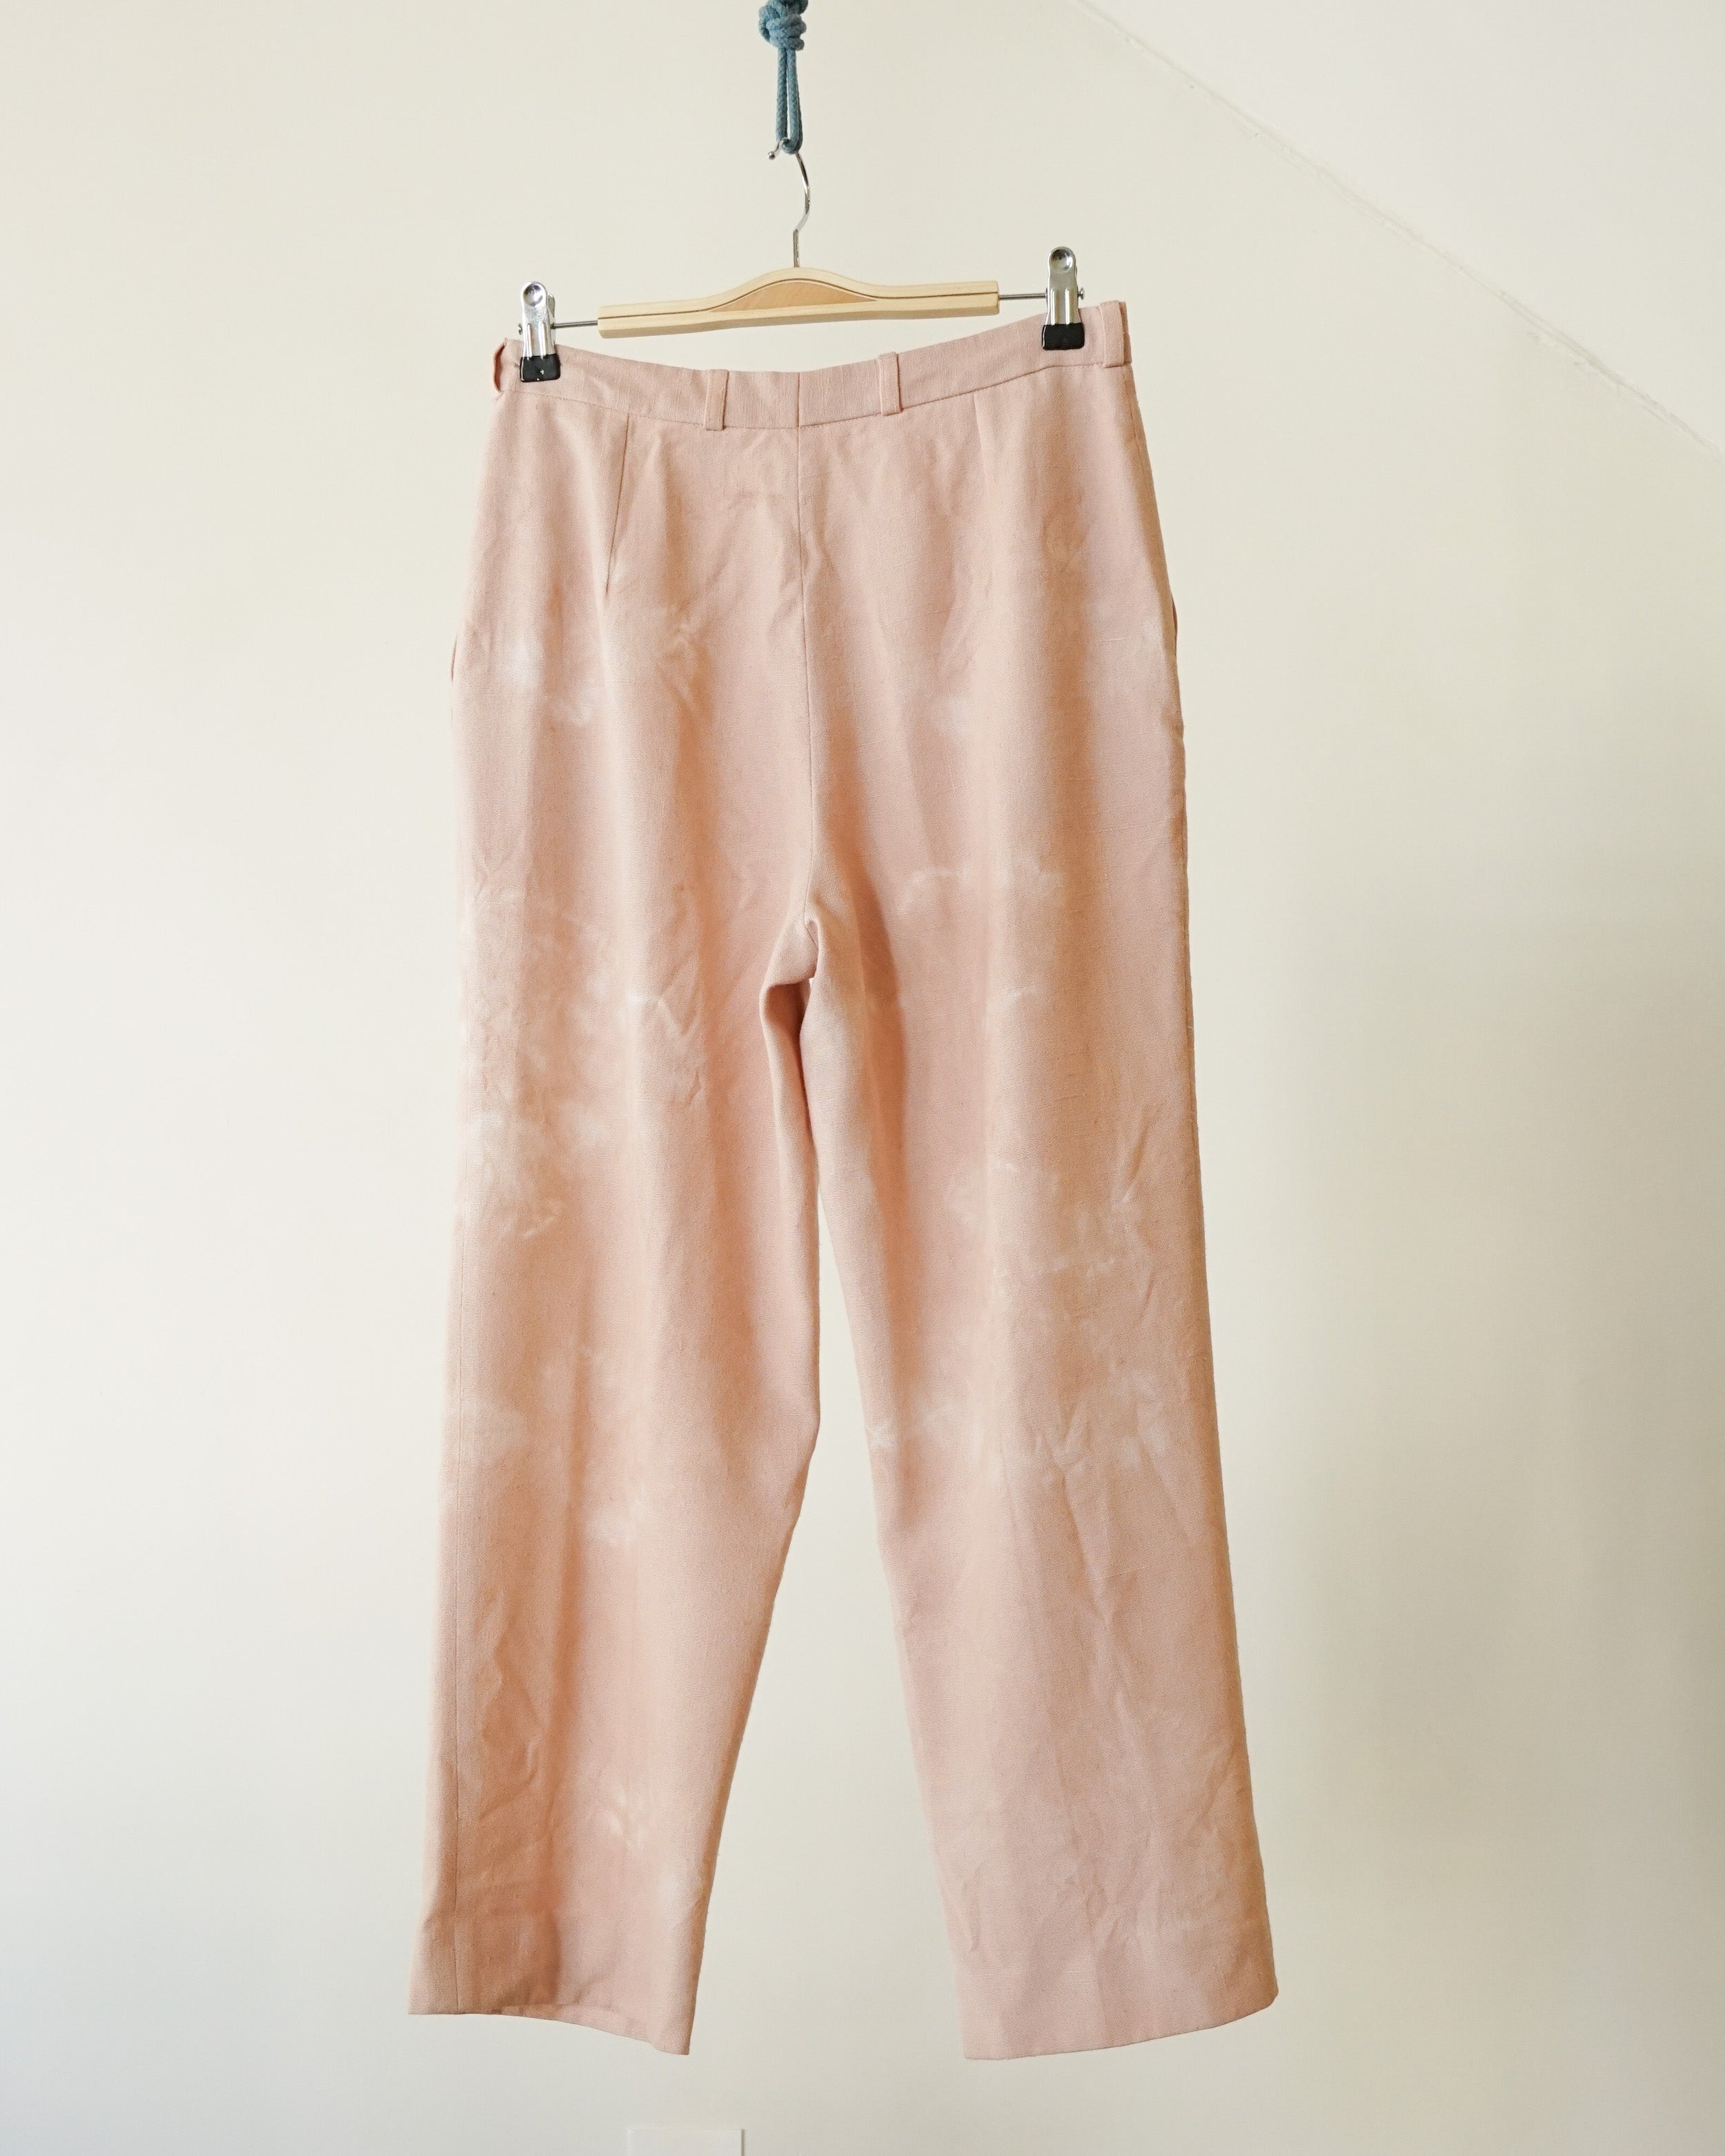 Avocado Dyed Pleated Pant 30W